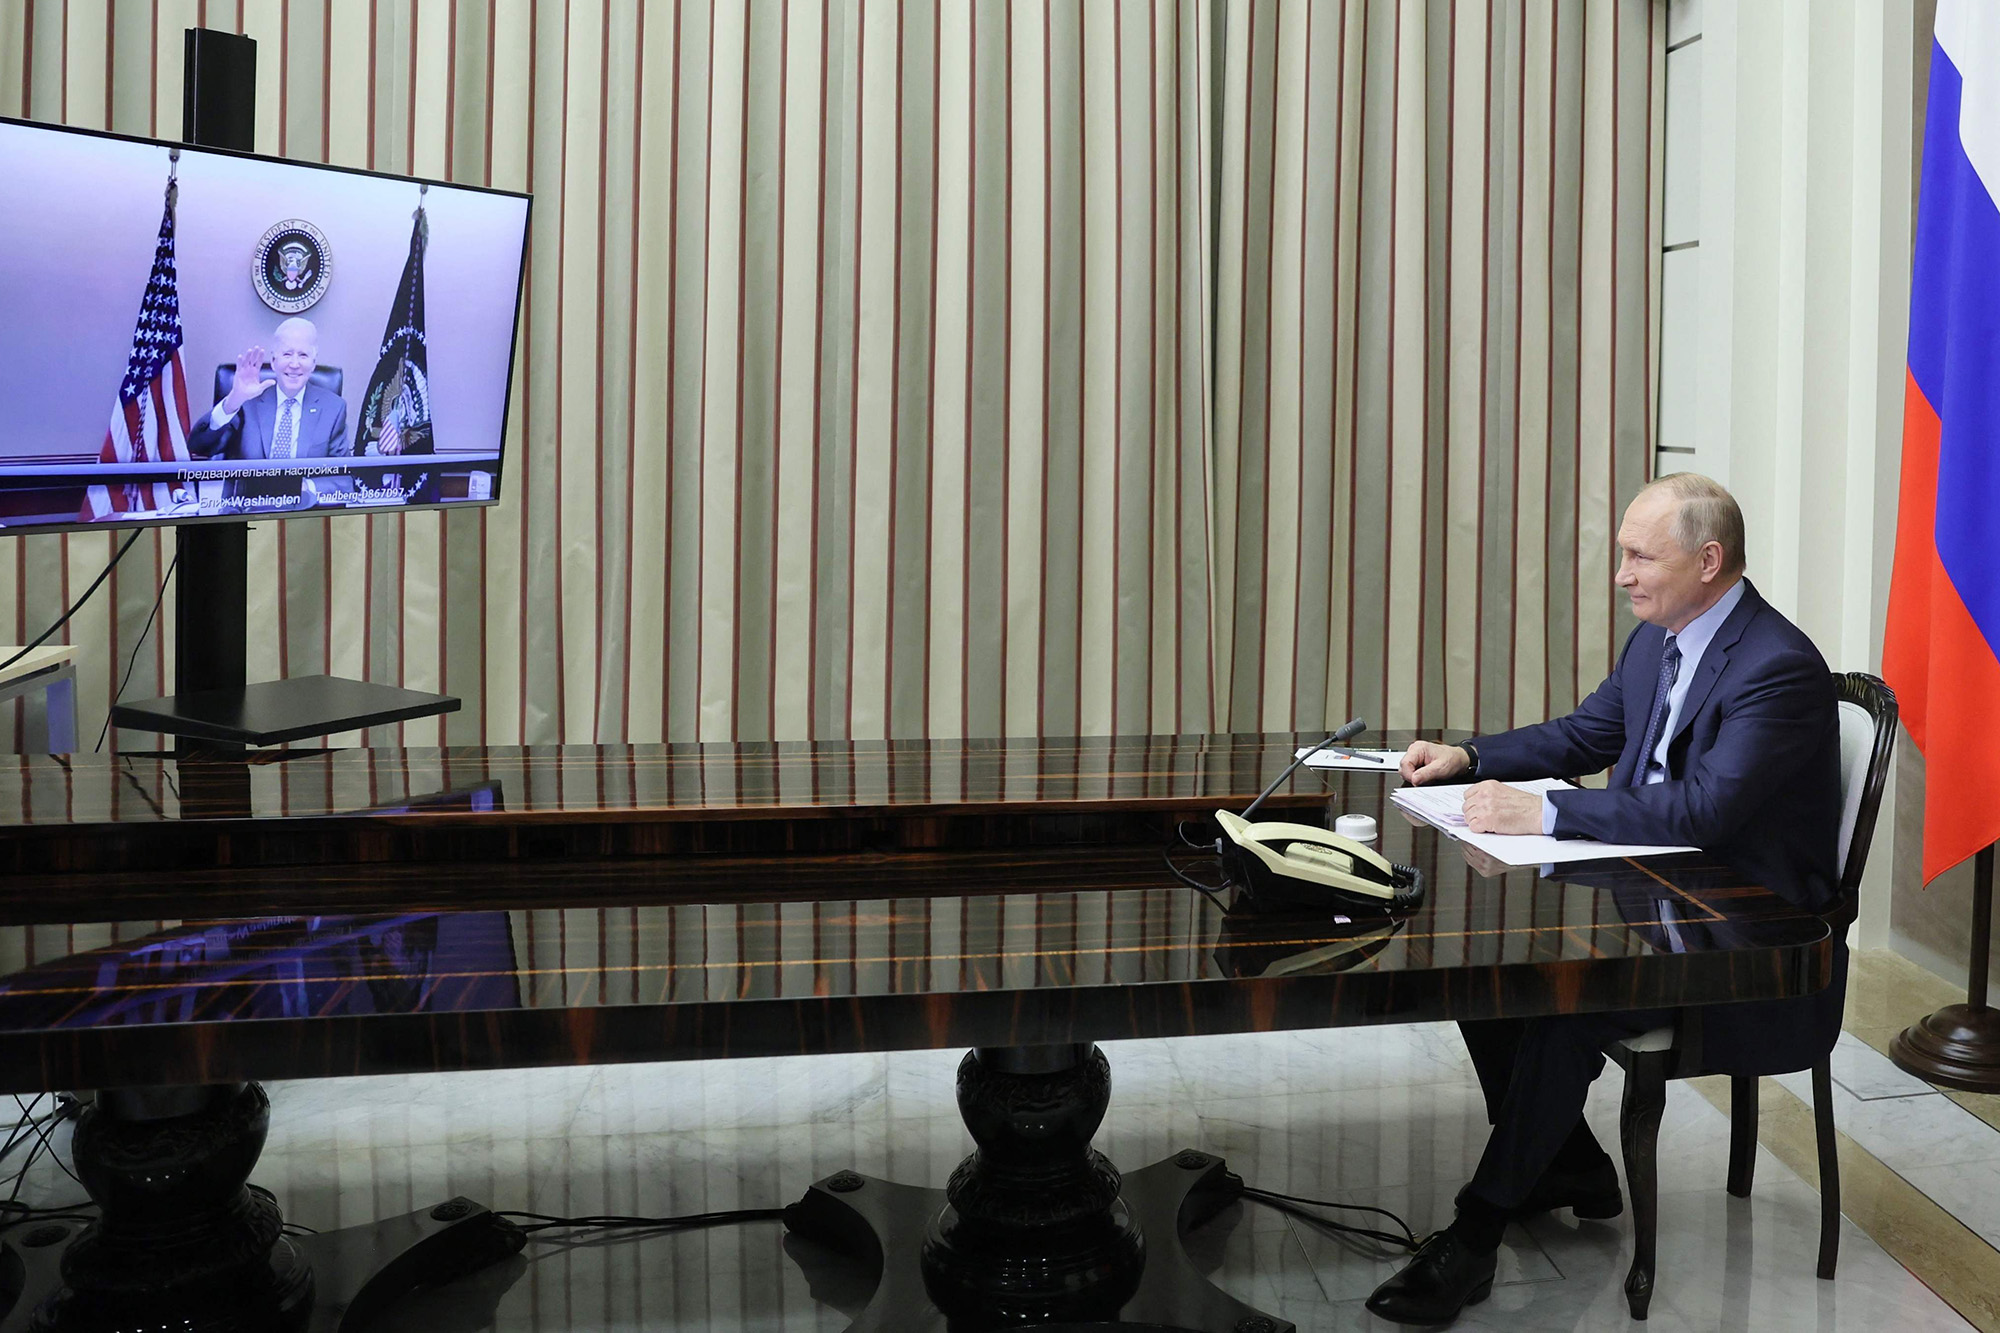 Russian President Putin attended a virtual meeting with President Biden.